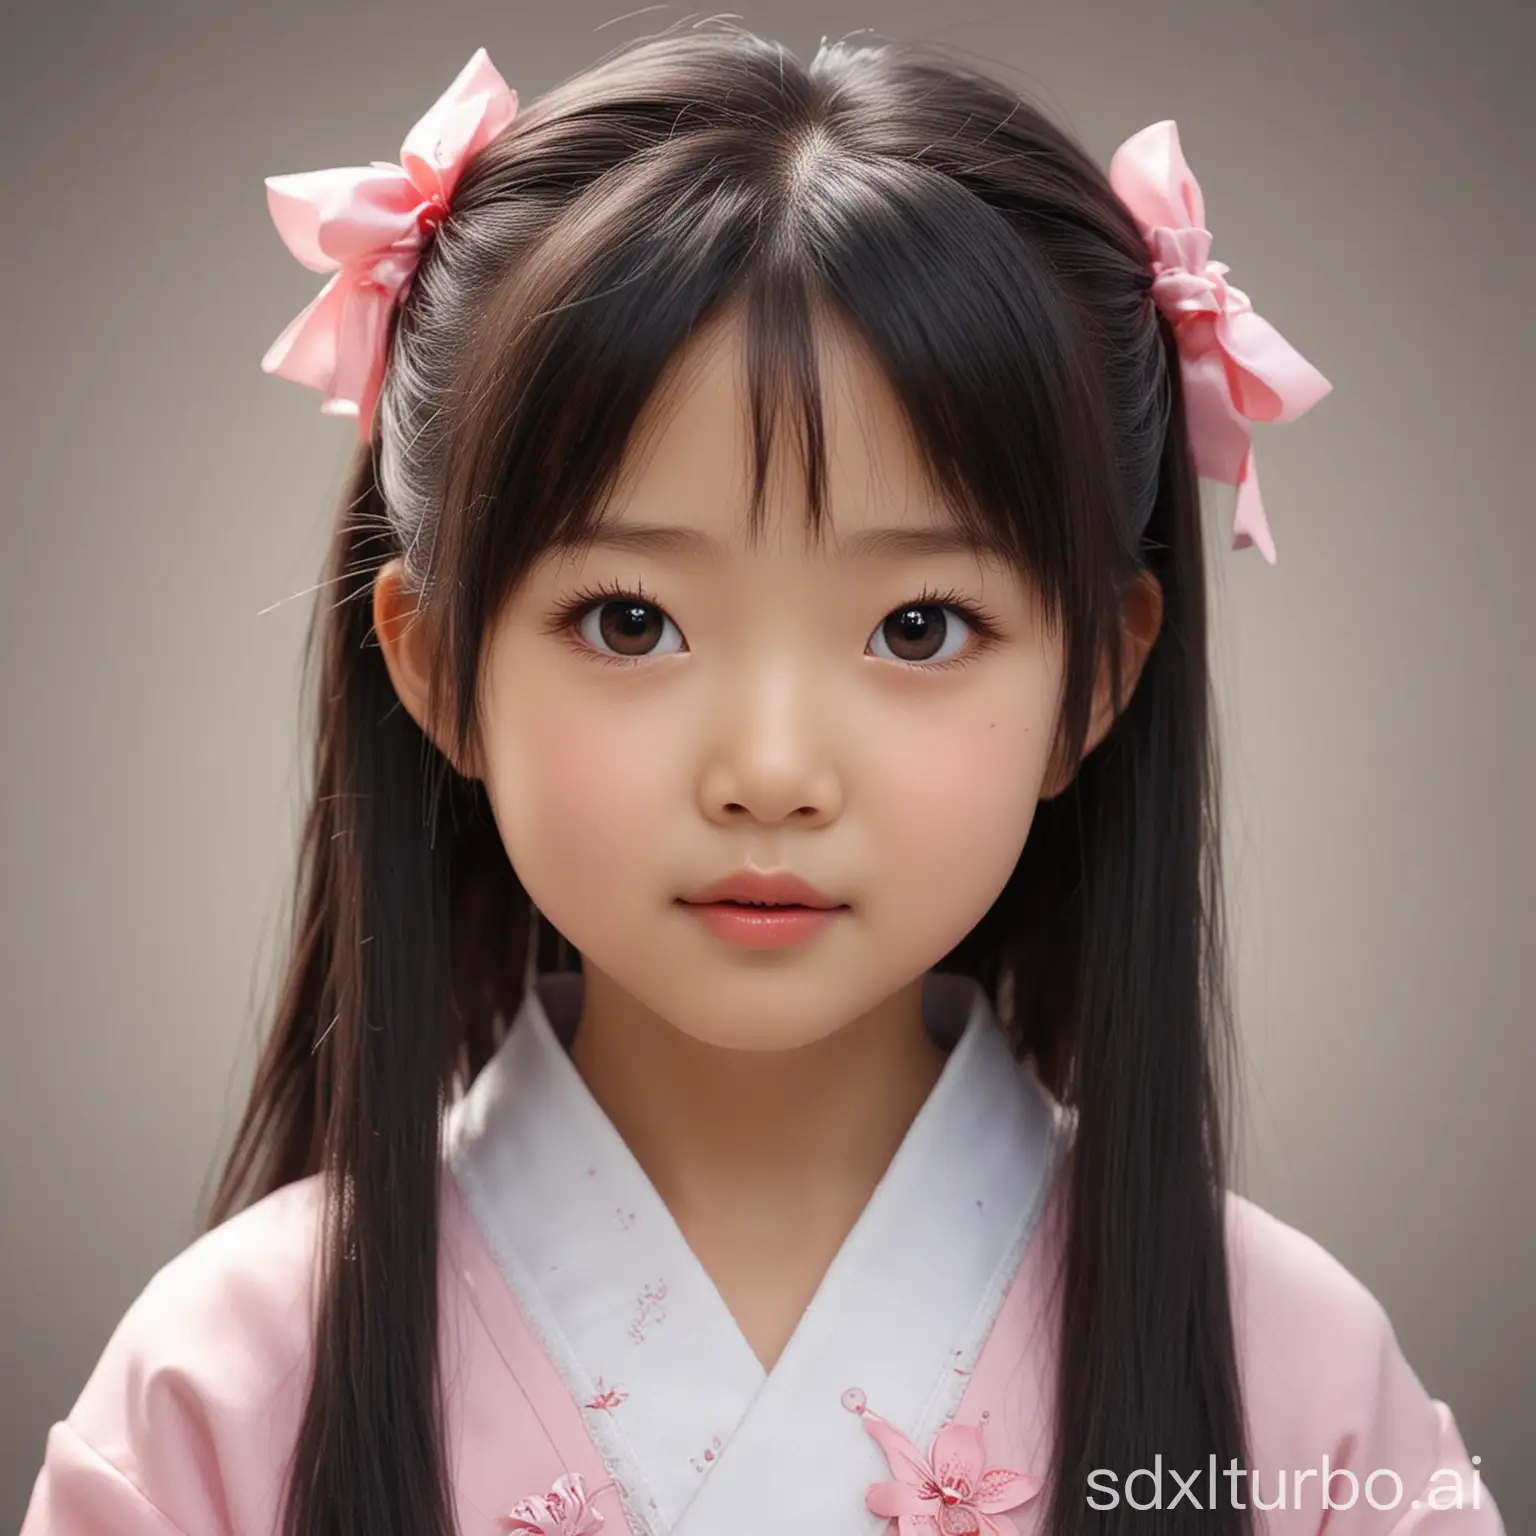 Adorable-Little-Chinese-Girl-Smiling-Happily